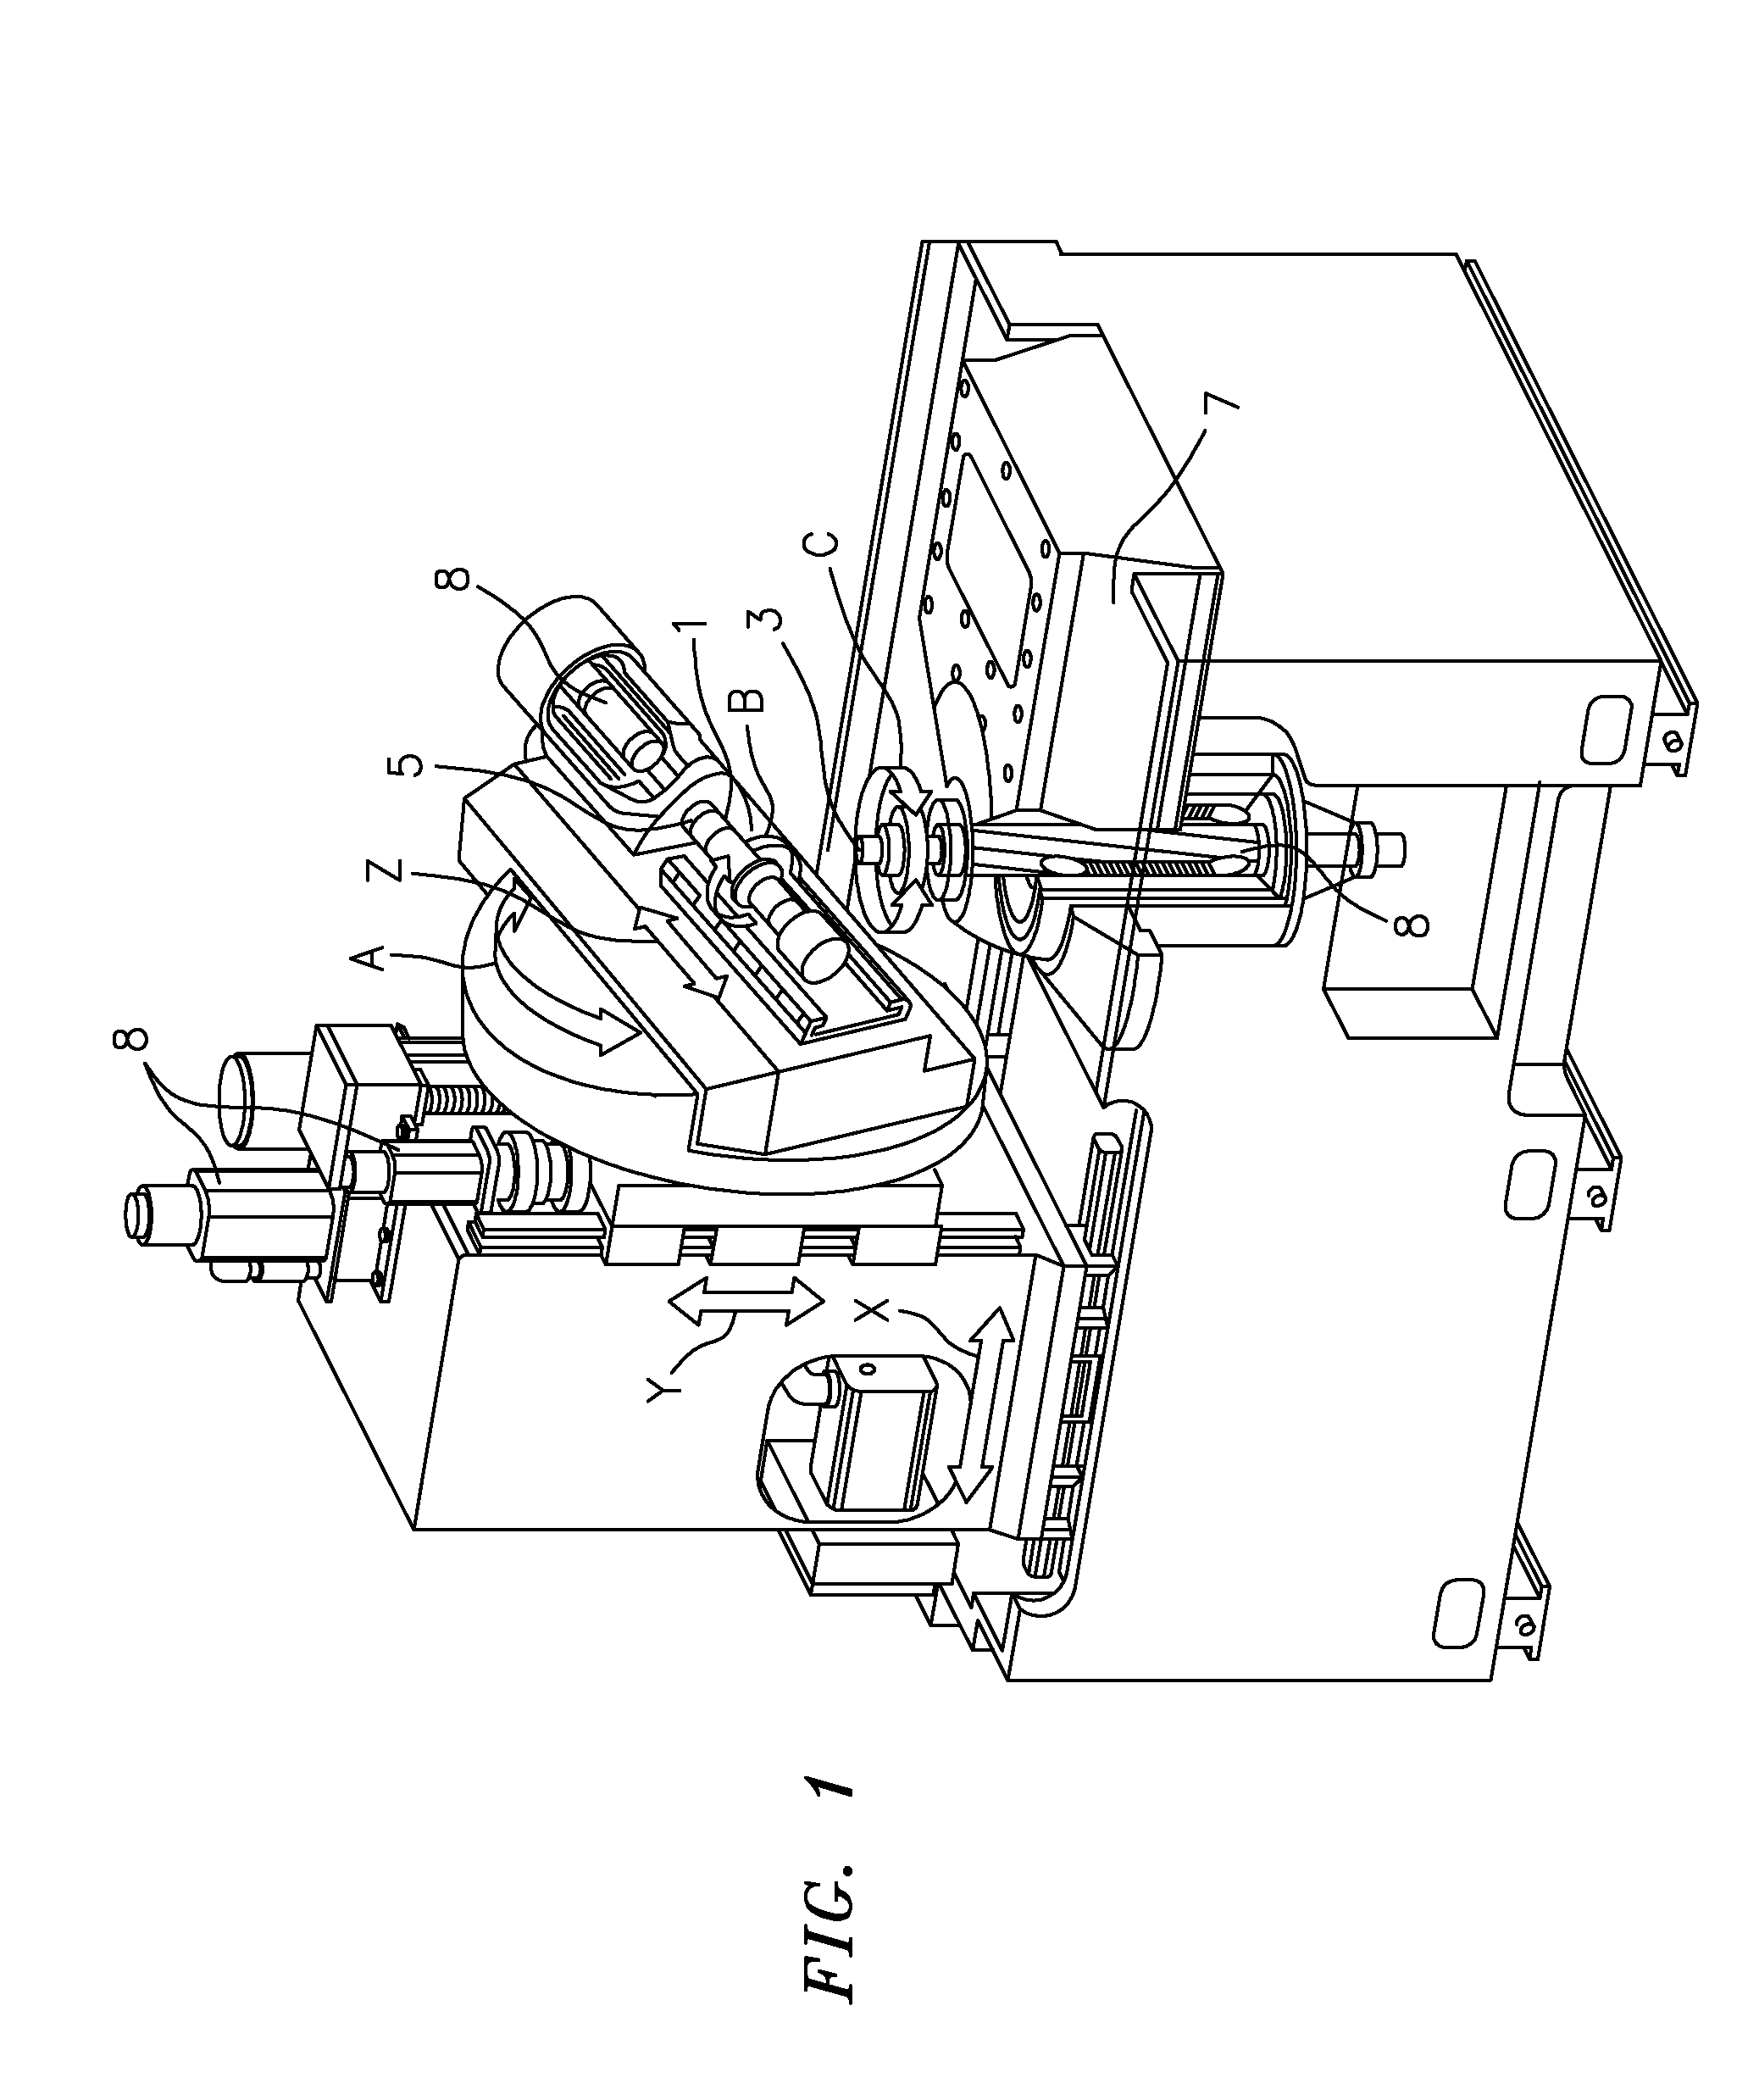 Method of manufacturing a multiple of identical gears by means of cutting machining